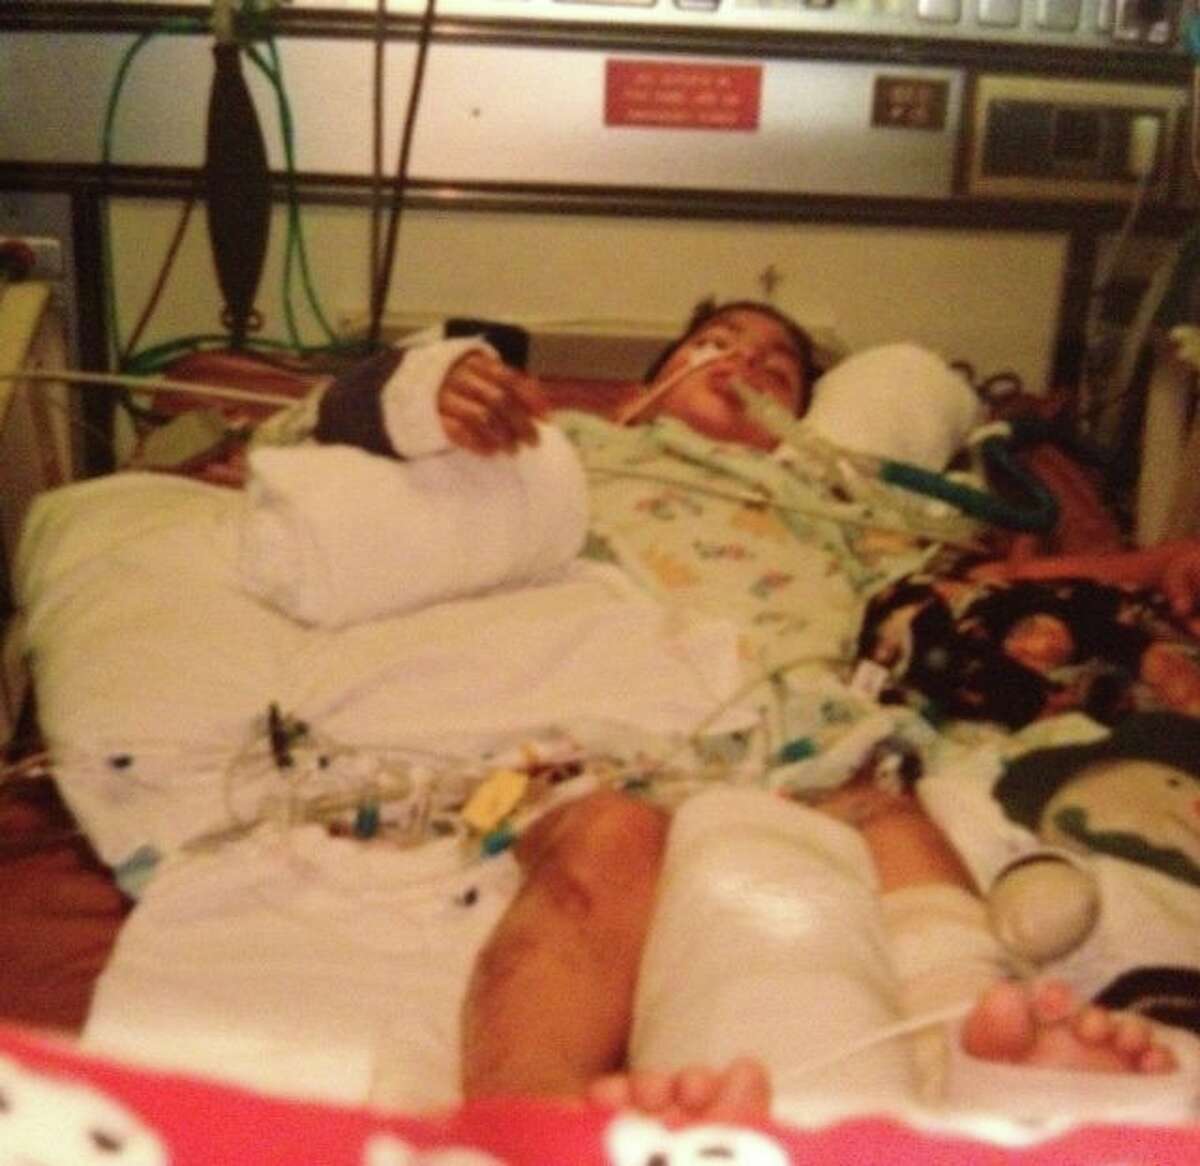 Christopher while in the intensive care unit at Denver Children's Hospital in August 1998.